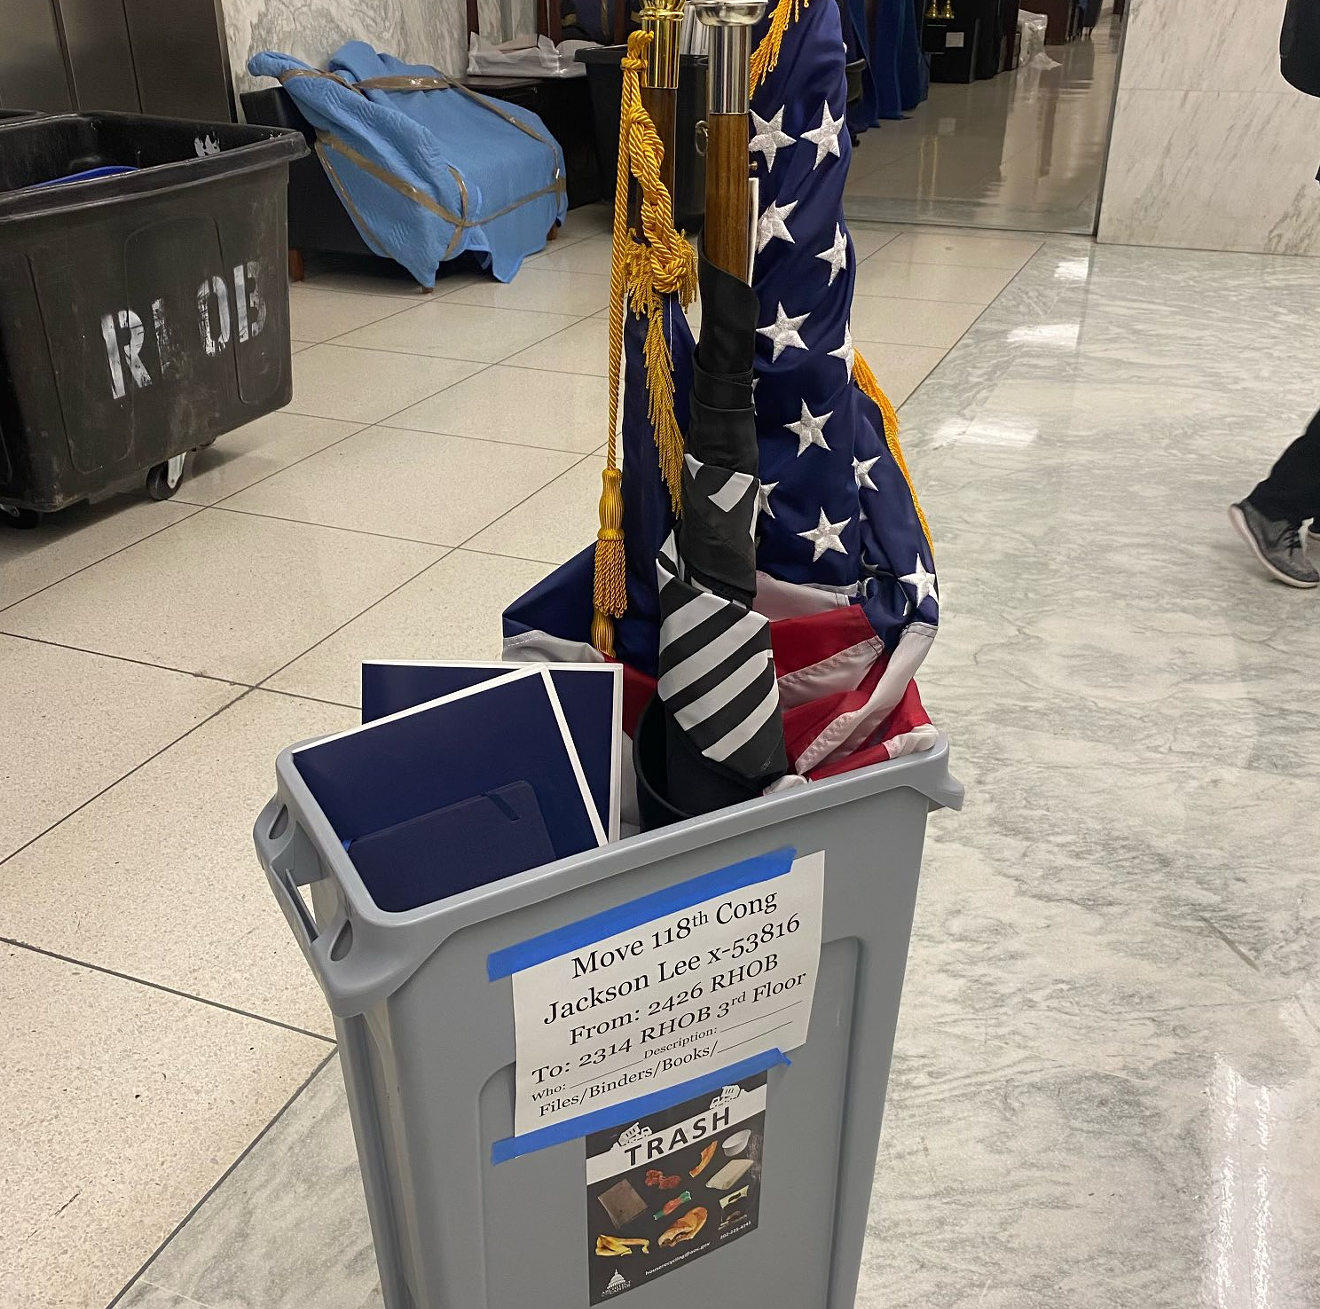 U.S. Rep. Brian Mast found a U.S. flag in a trash bin that was being used for temporary storage.